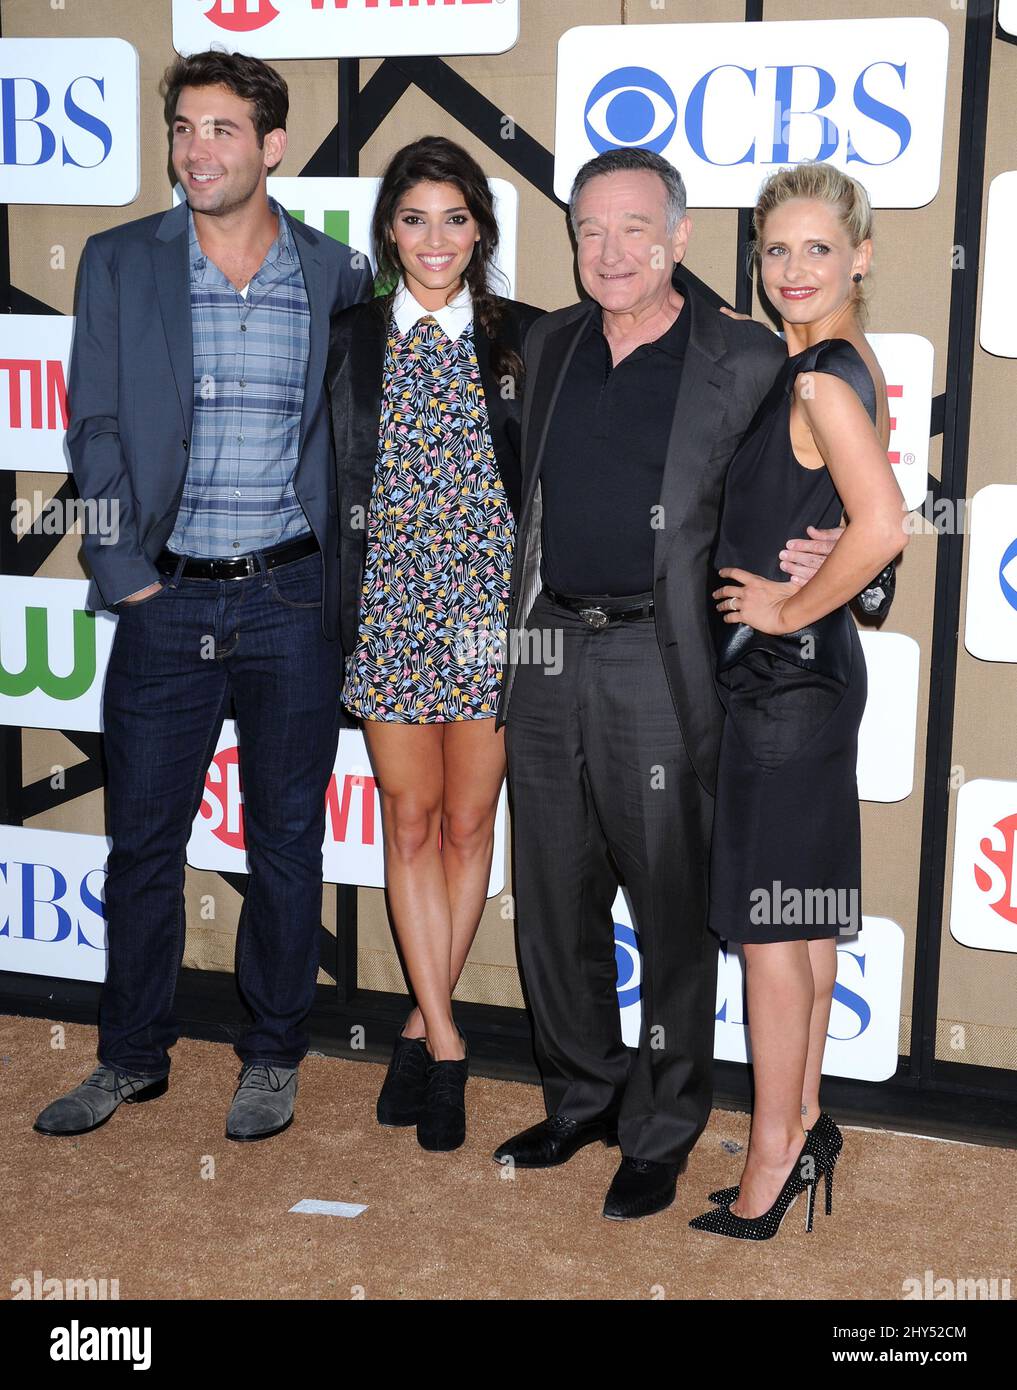 FILE PHOTO: Robin Williams dies age 63. July 29, 2013 Beverly Hills, Ca. James Wolk, Amanda Setton, Robin Williams and Sarah Michelle Gellar CBS, Showtime and The CW 2013 Annual Summer Stars Party held at The Beverly Hilton Hotel Stock Photo